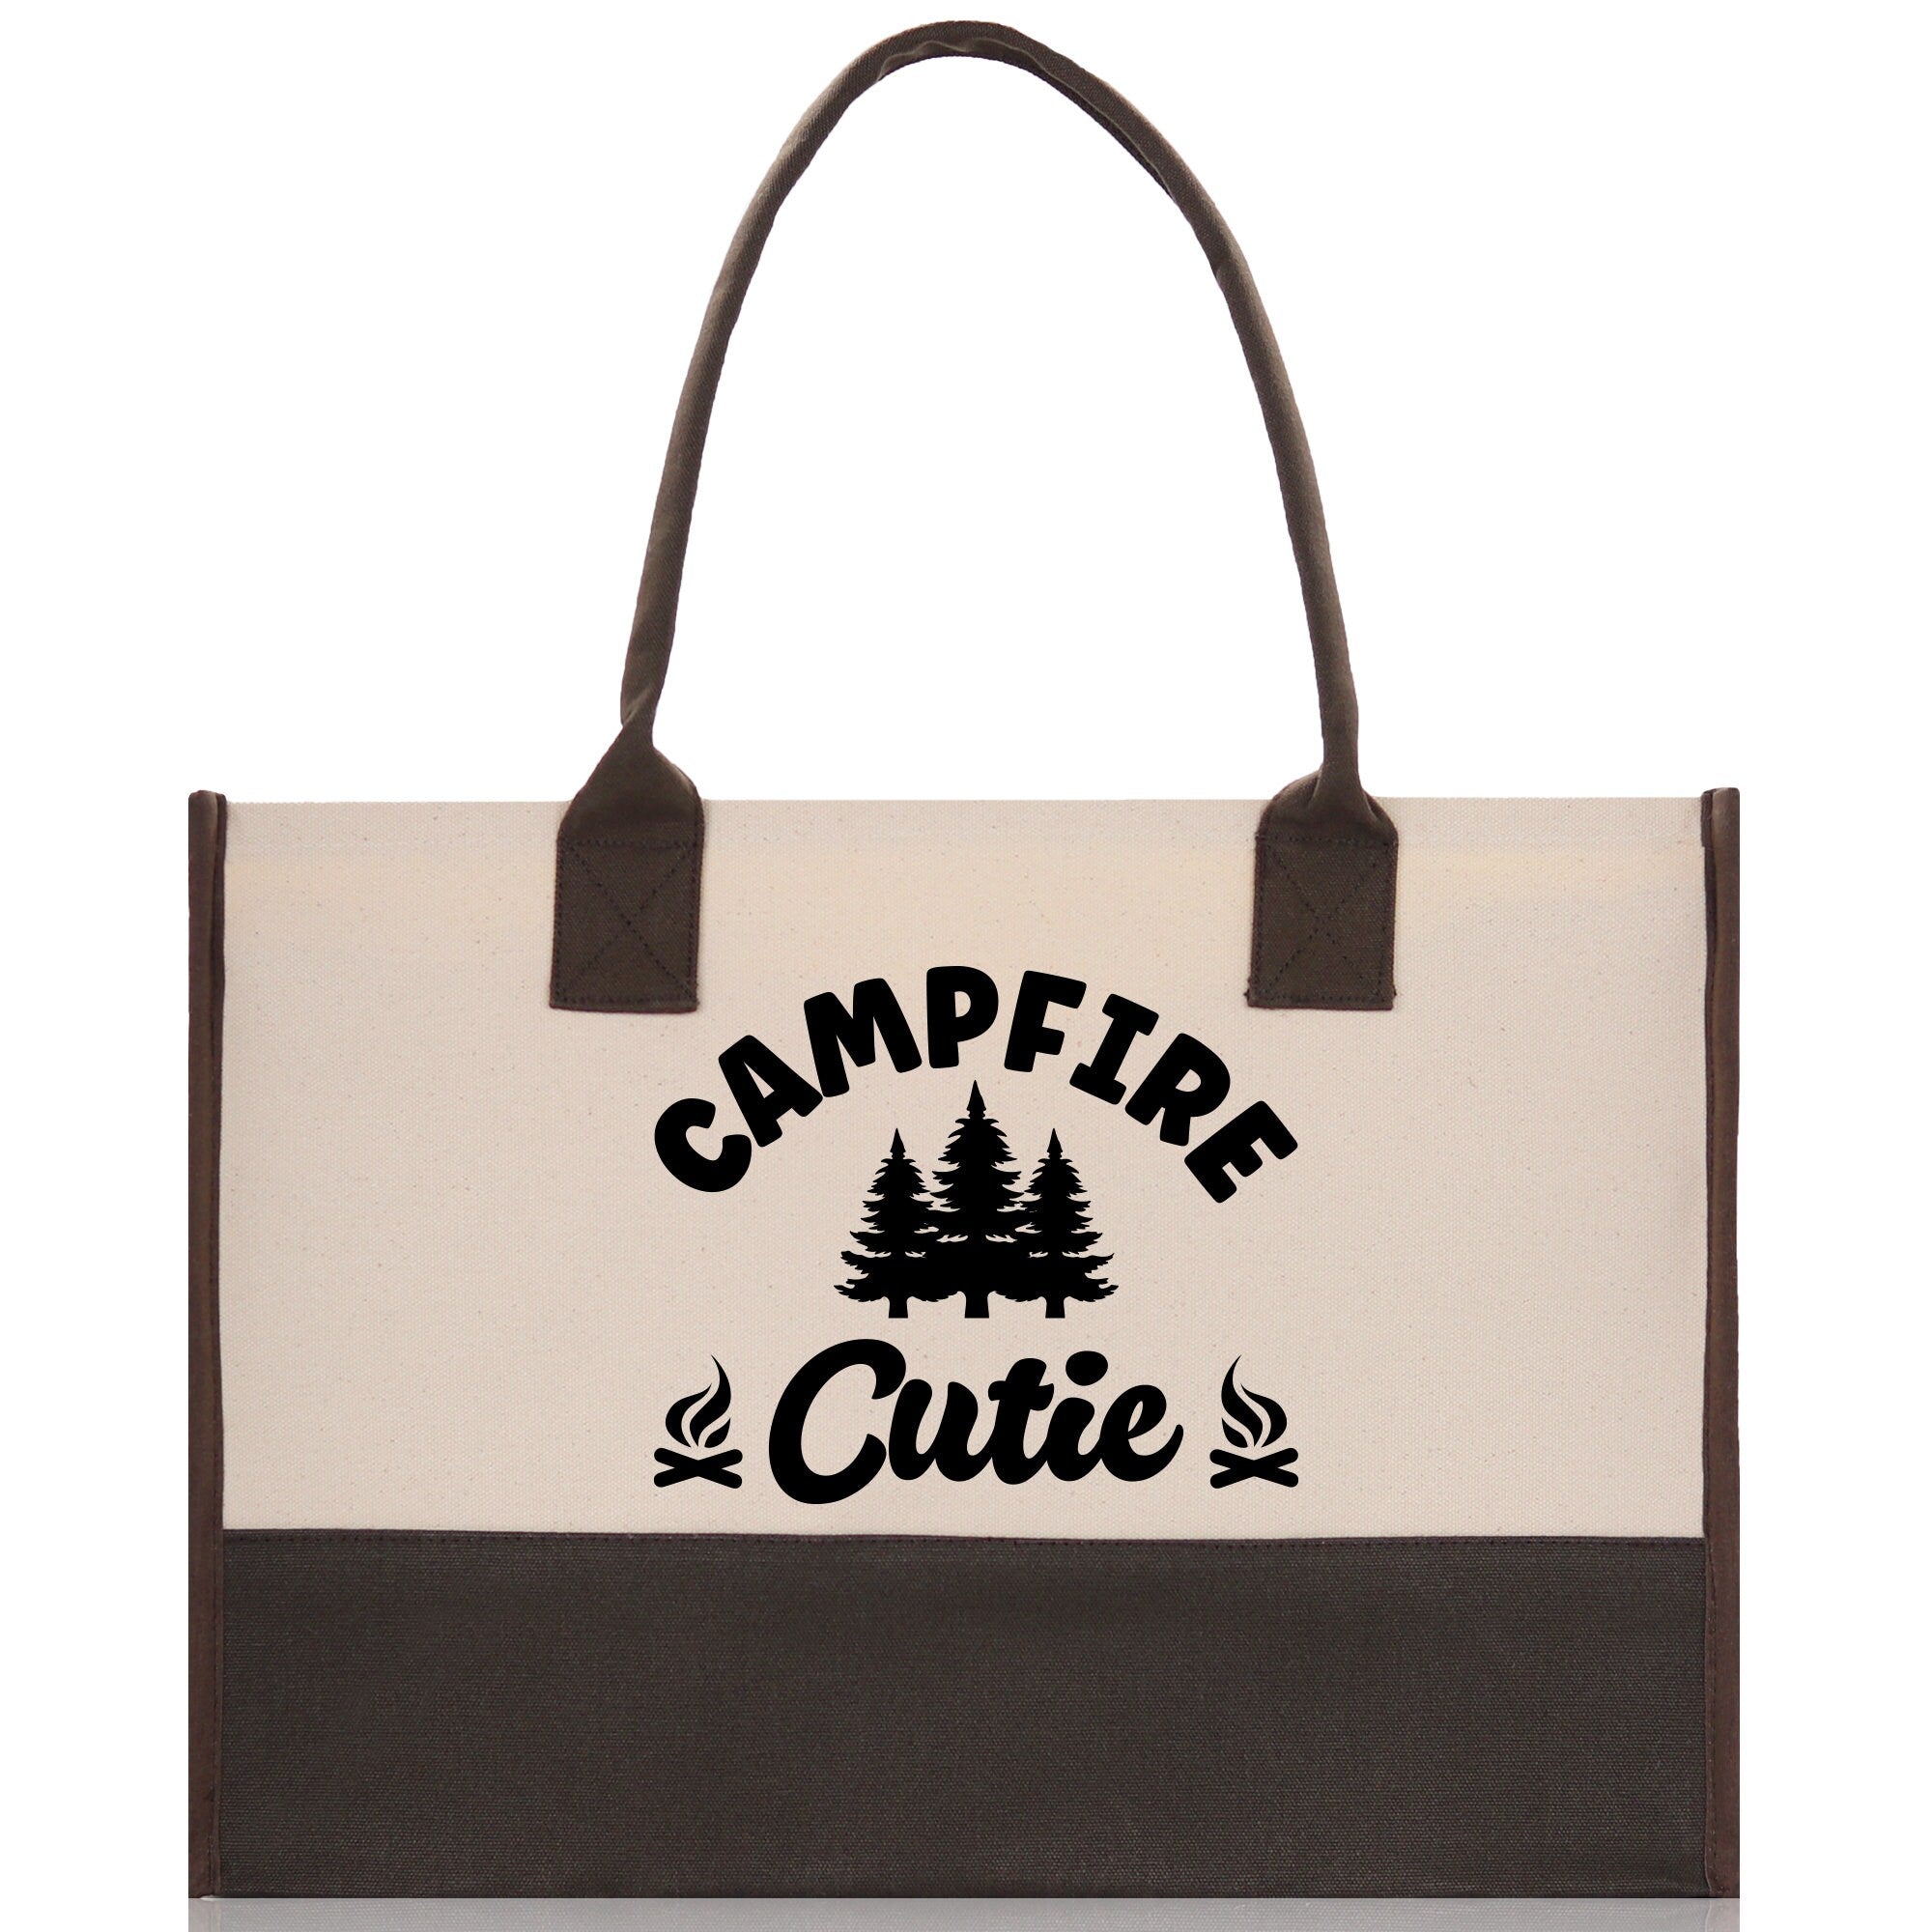 Campfire Cutie Cotton Canvas Chic Tote Bag Camping Tote Camping Lover Gift Tote Bag Outdoor Tote Weekender Tote Camper Multipurpose Tote